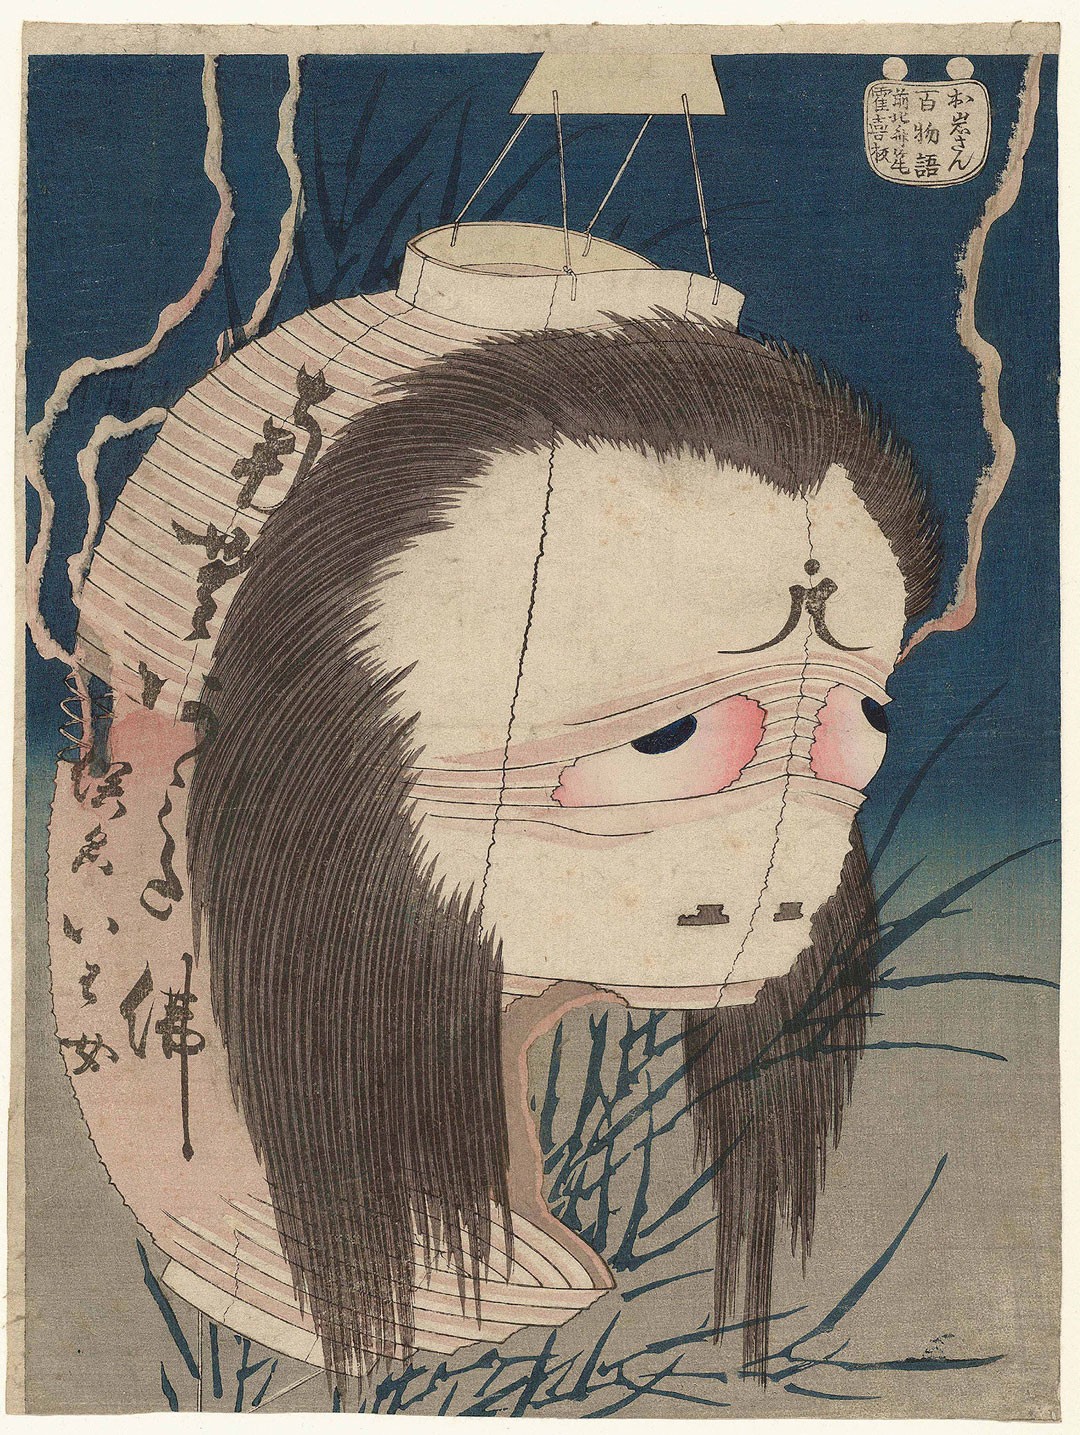 <BODY><div>Katsushika Hokusai, “The Ghost of Oiwa” (detail) from the series One Hundred Ghost Stories, Japan, 1831/32</div><div>© MAK/Georg Mayer</div></BODY>